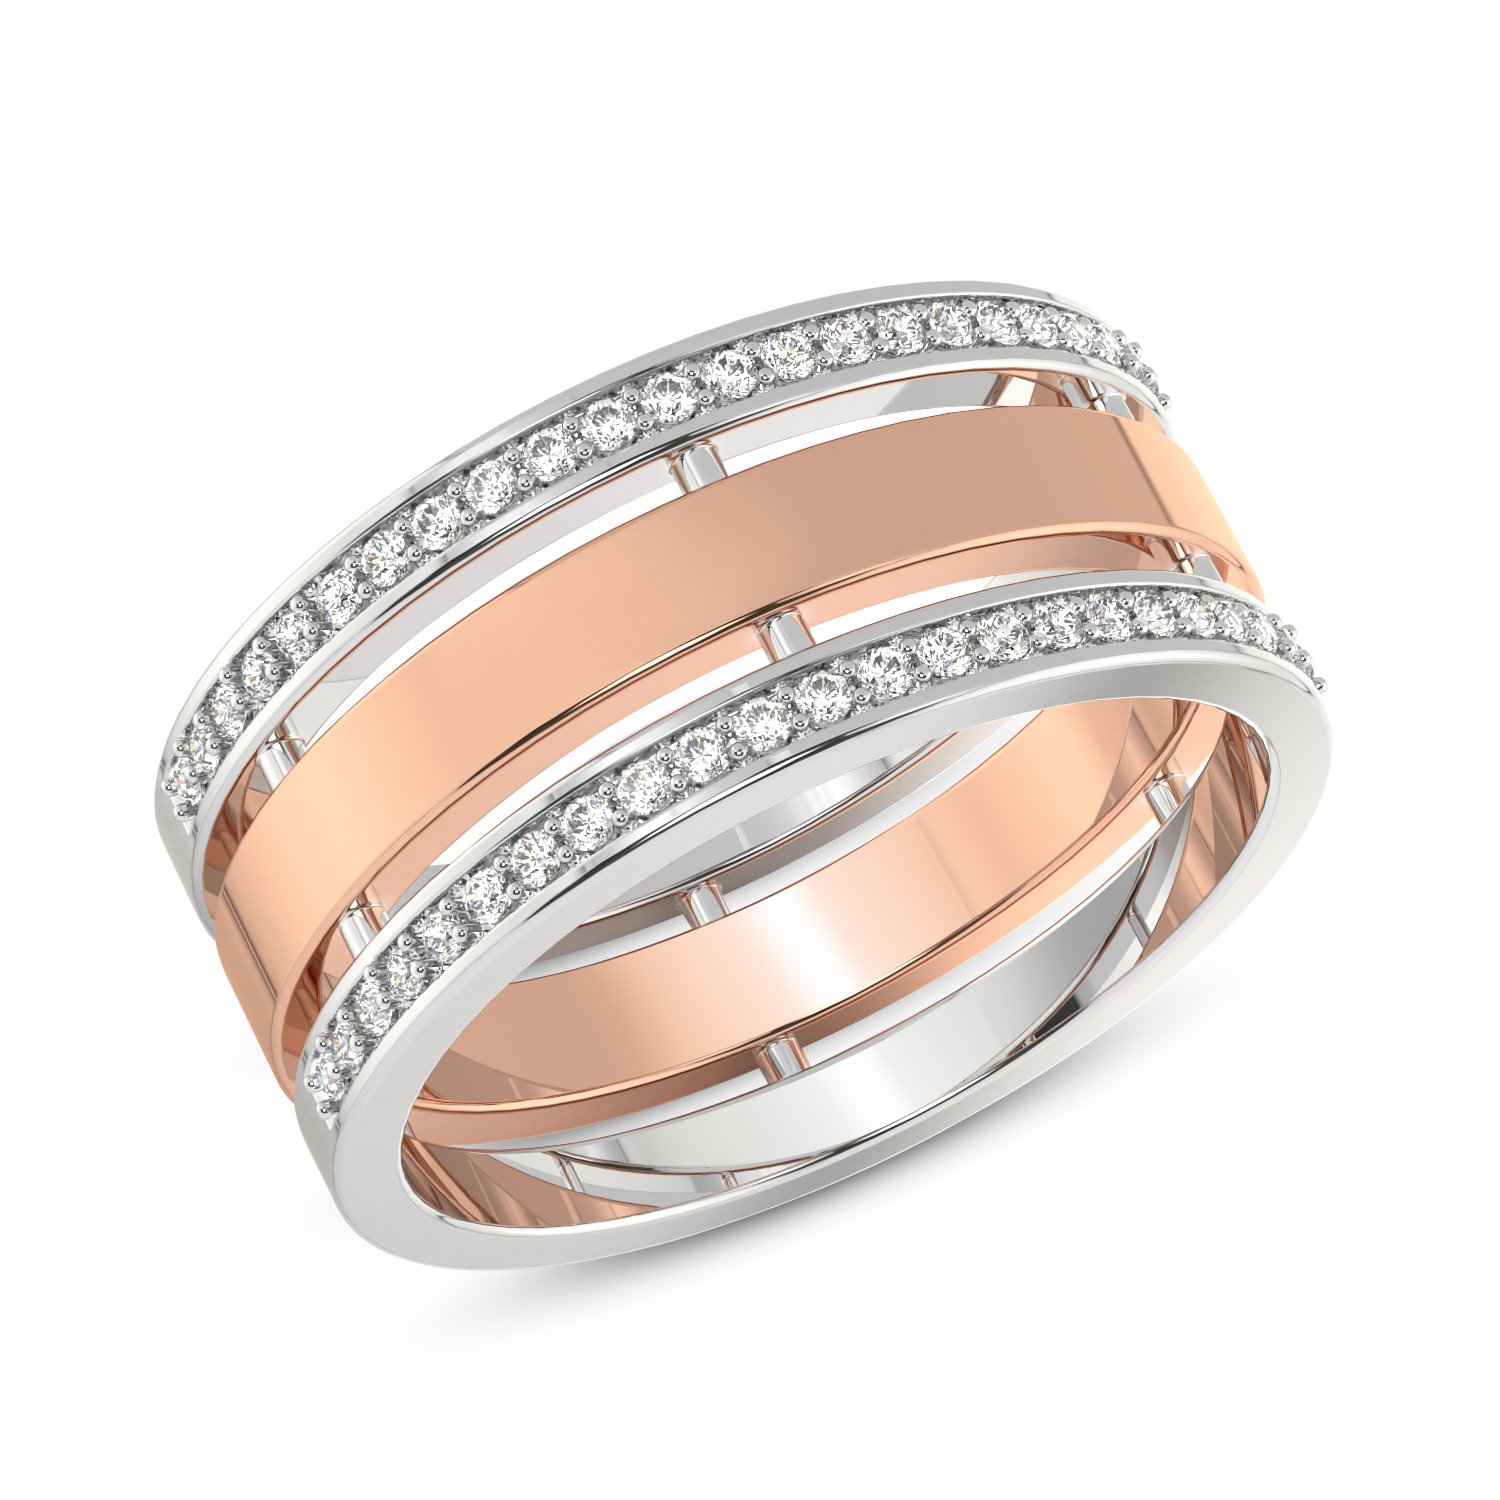 Unfading Love Couple Rings Top View